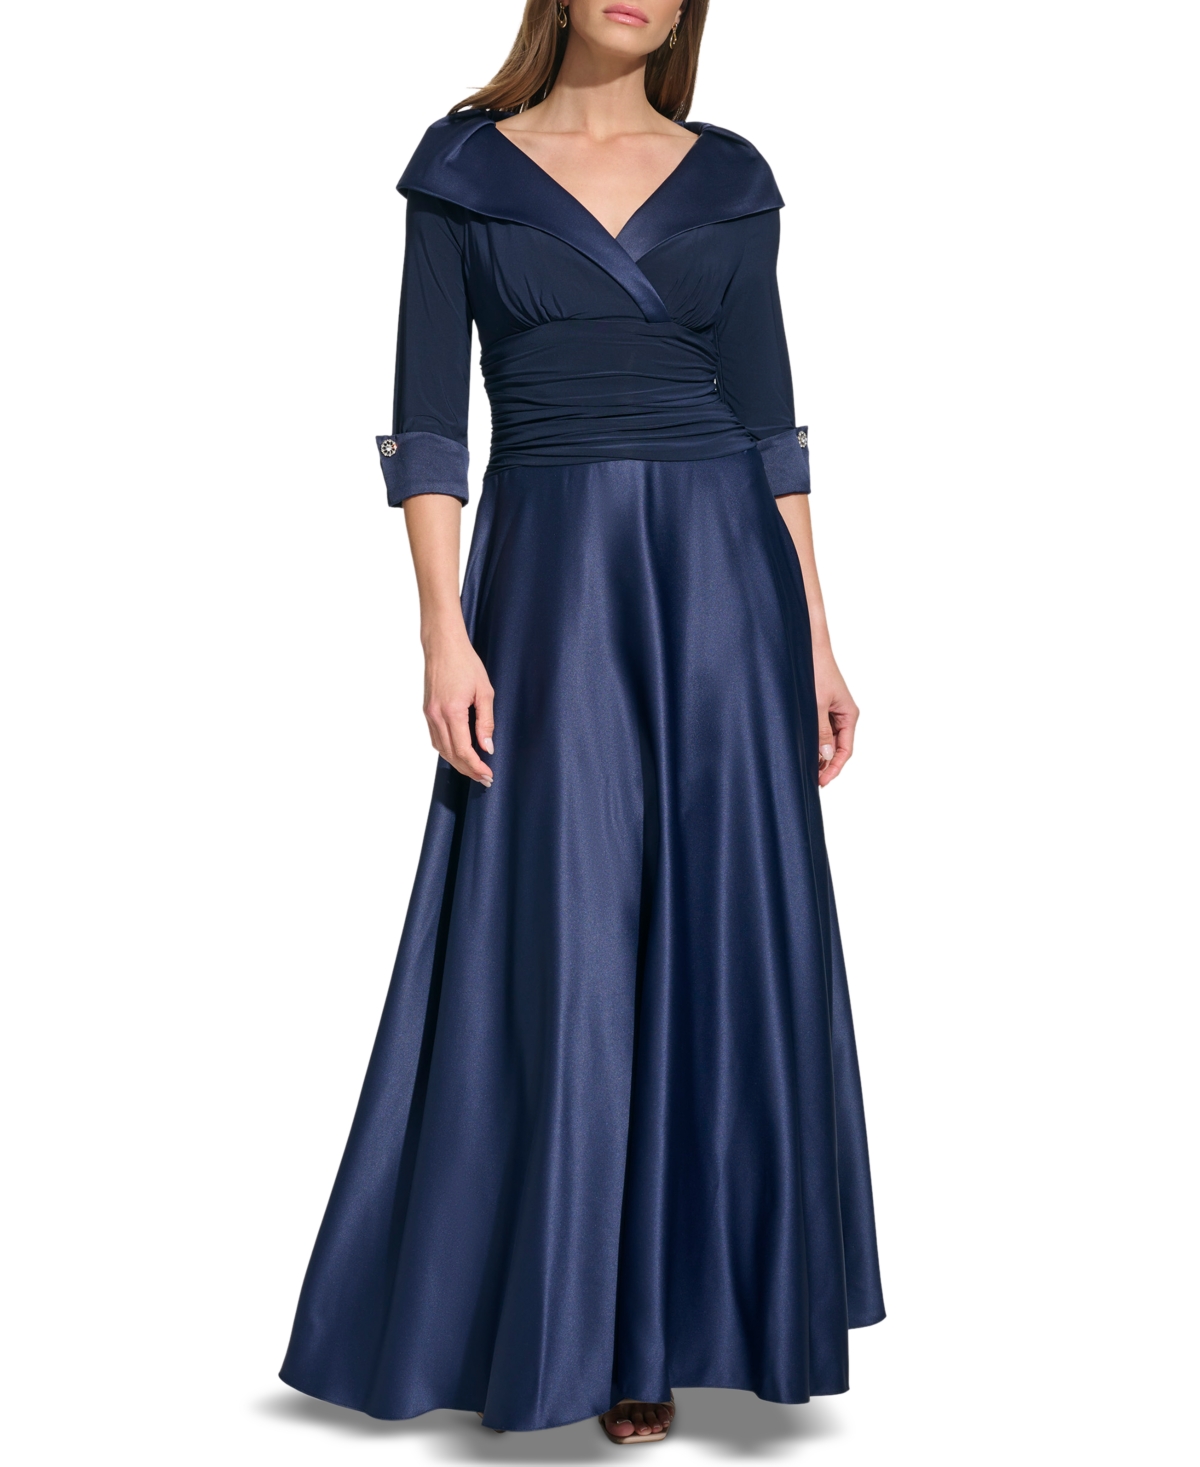 Women's Mixed-Media Ruched-Waist Gown - Navy